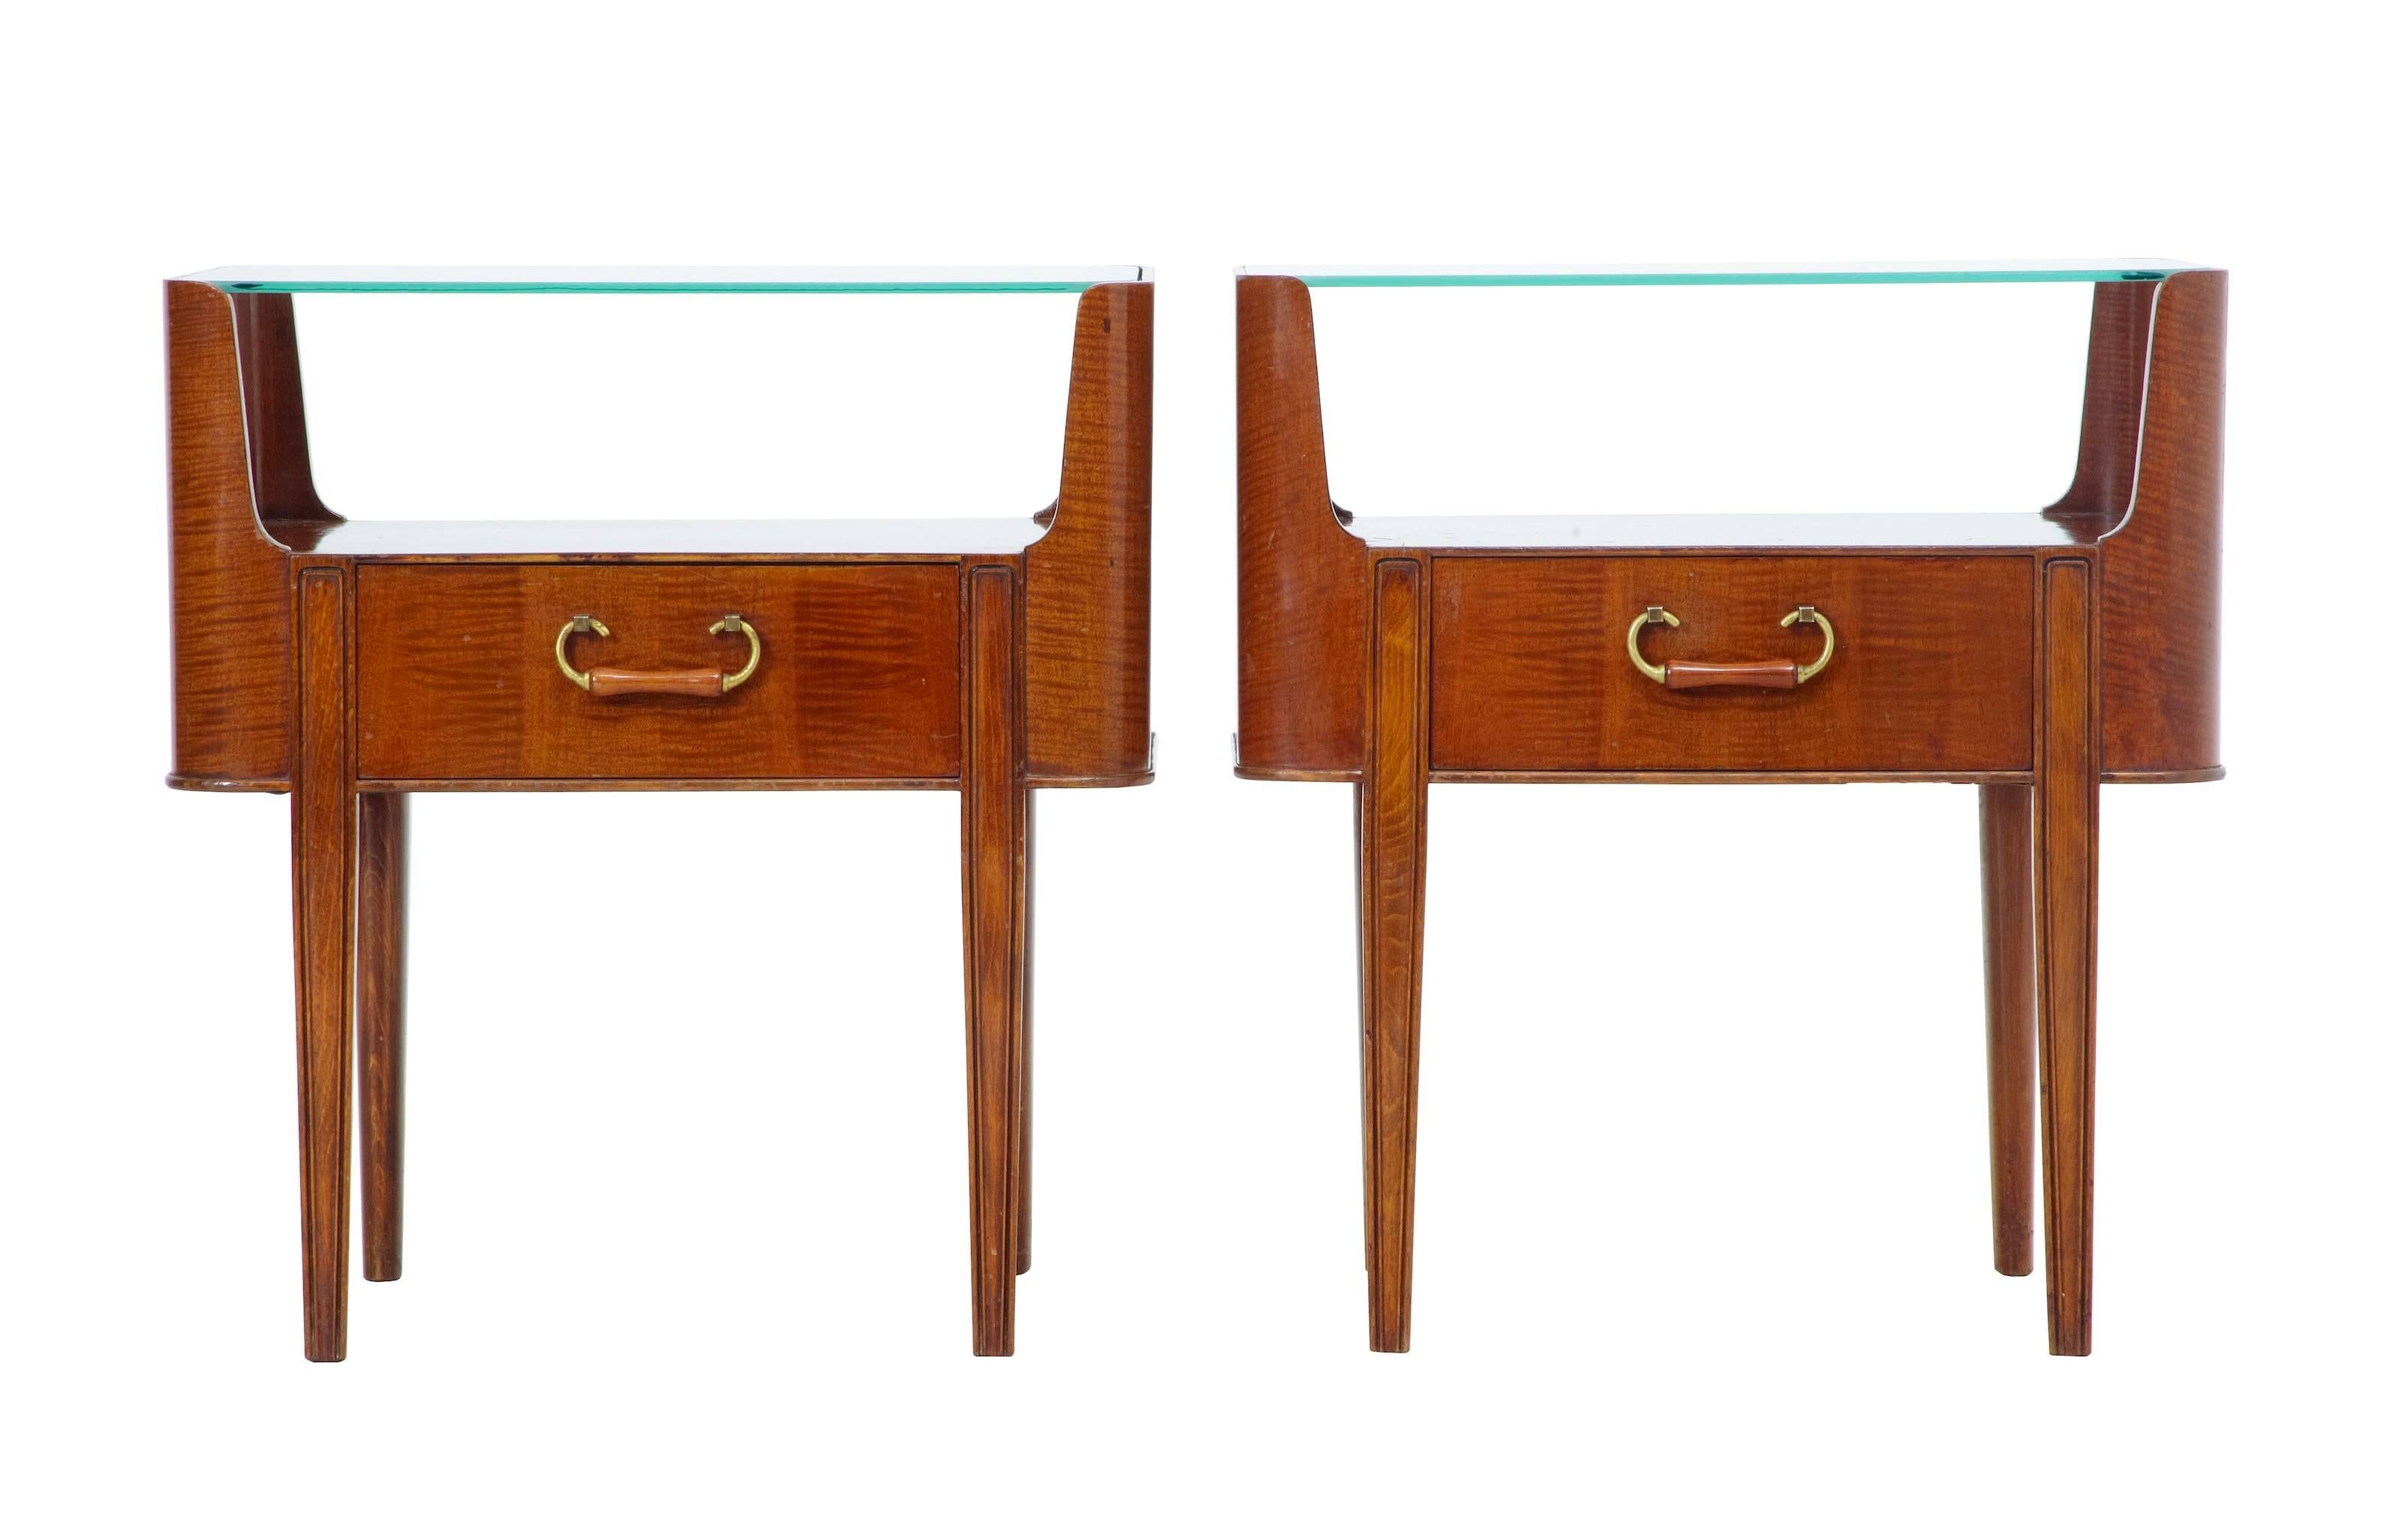 Pair of Art Deco inspired Scandinavian bedside tables, circa 1960.
Each with drop in glass top.
Open aperture for storage, below which a single drawer with brass and wood handle.
Standing on turned legs.
Some surface marks and evidence of normal